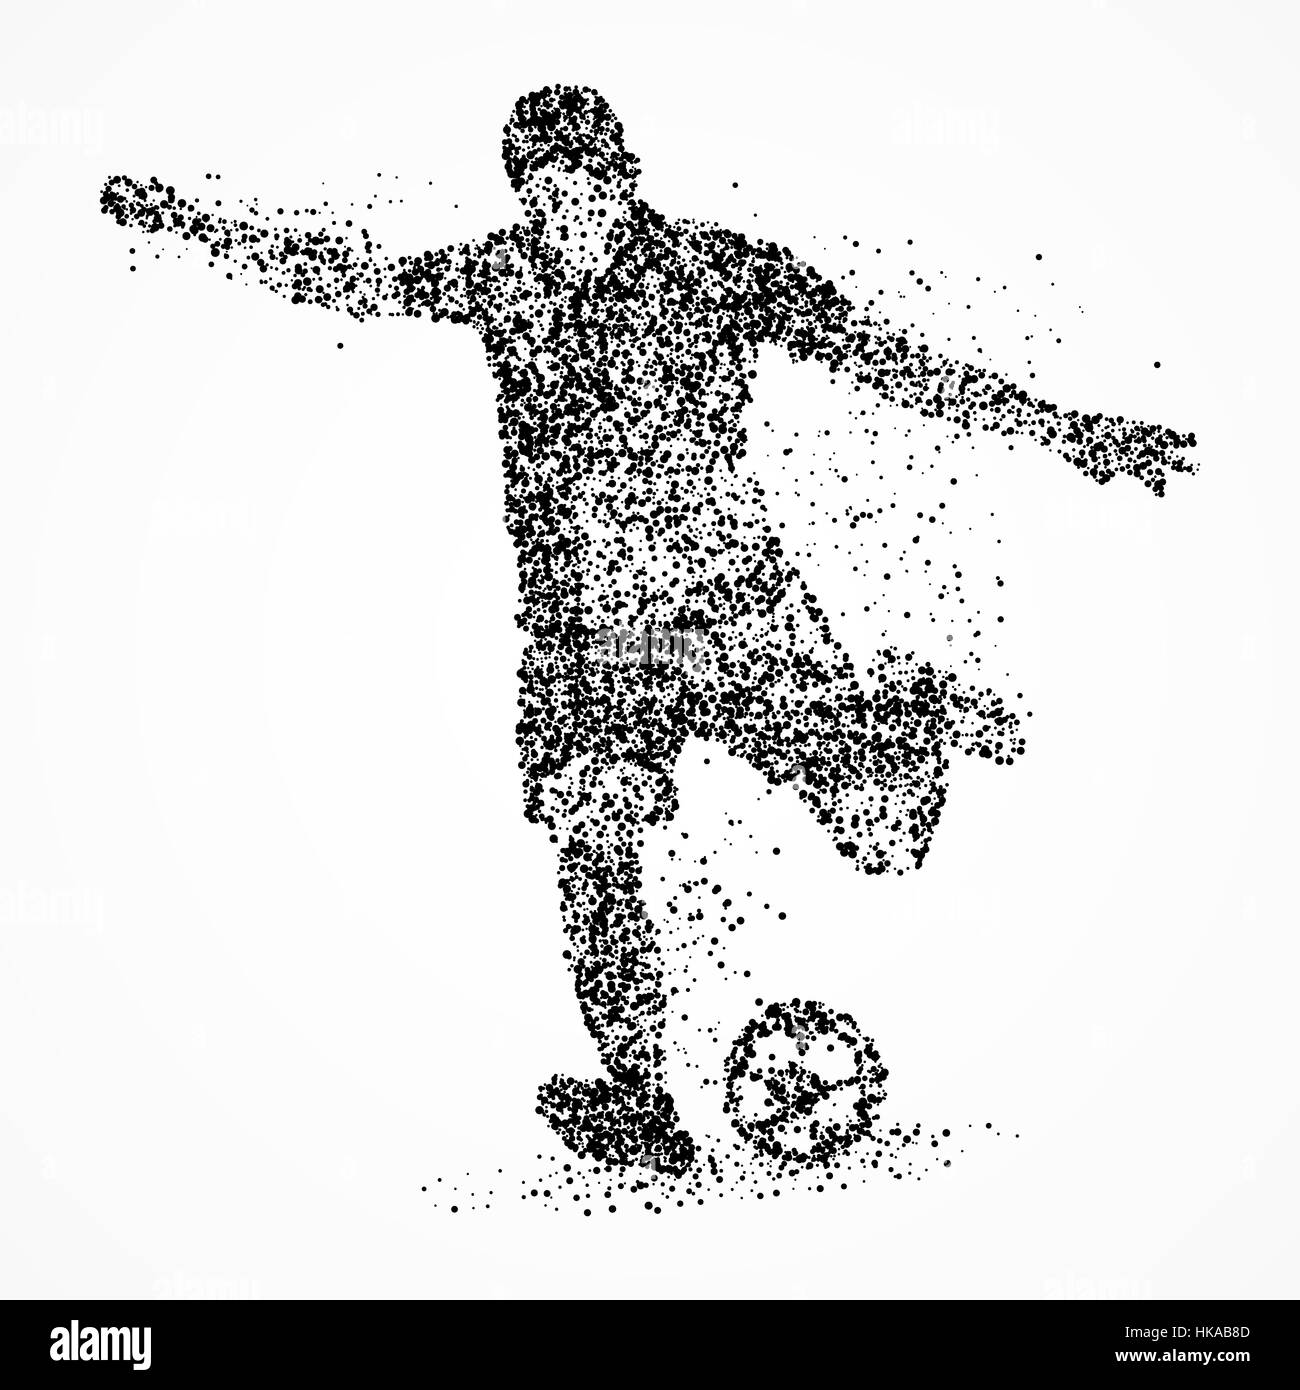 Abstract football player of the circles. Photo illustration. Stock Photo